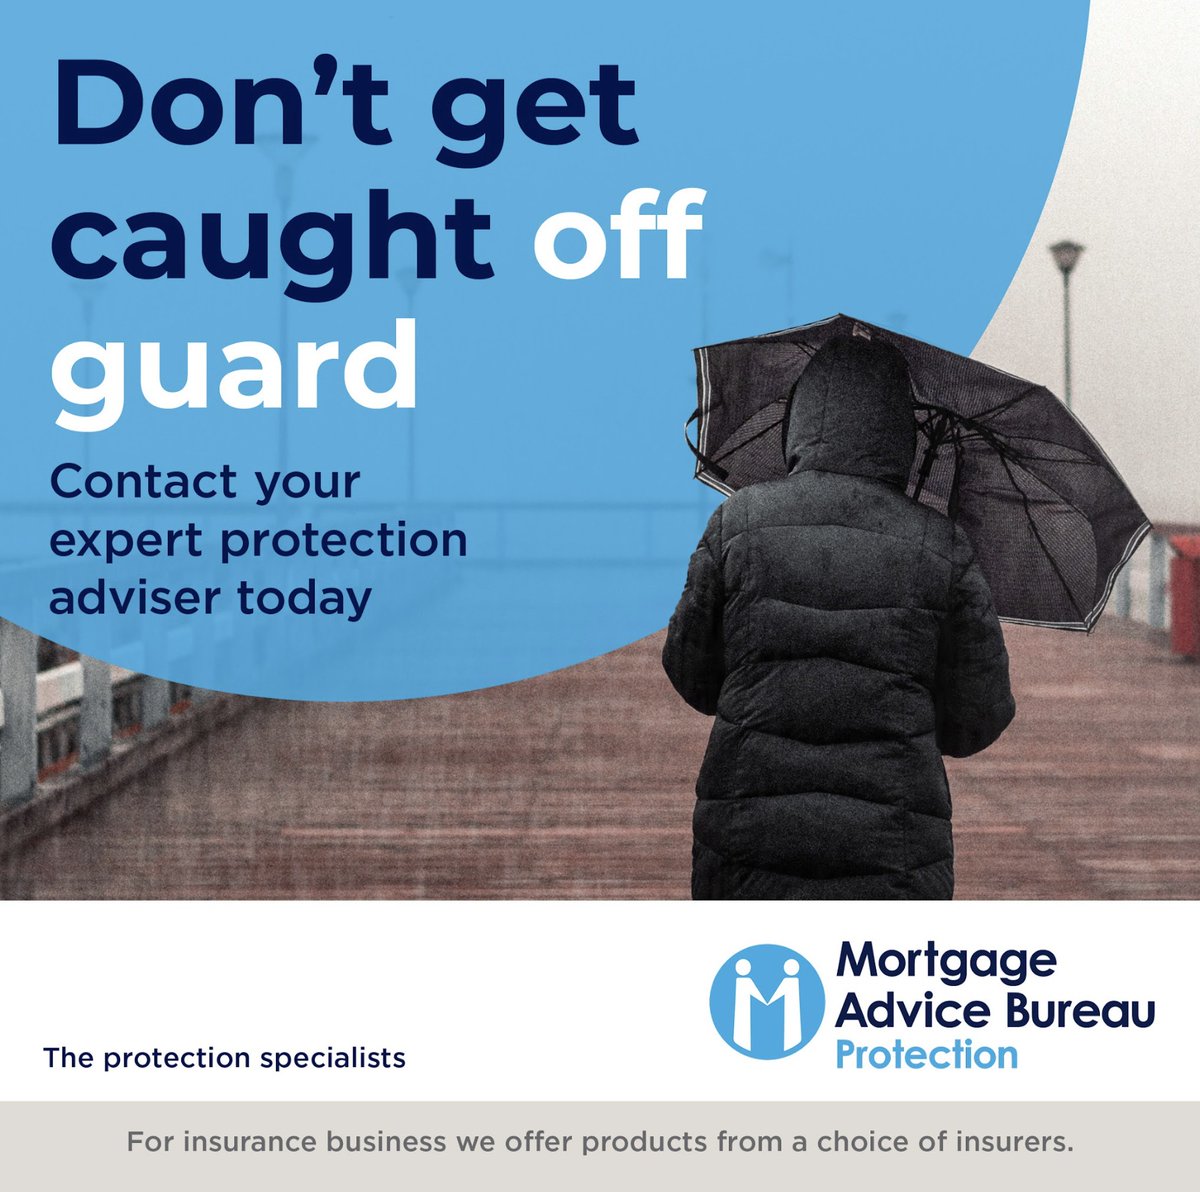 We are committed to finding the right protection policies for your needs to protect what matters to you and give you peace of mind, should the worst happen.

Check out our free protection tool today! 🔧 mortgageadvicebureau.com/protection-tool

#Protection #MortgageAdviceBureau #ProtectionTool